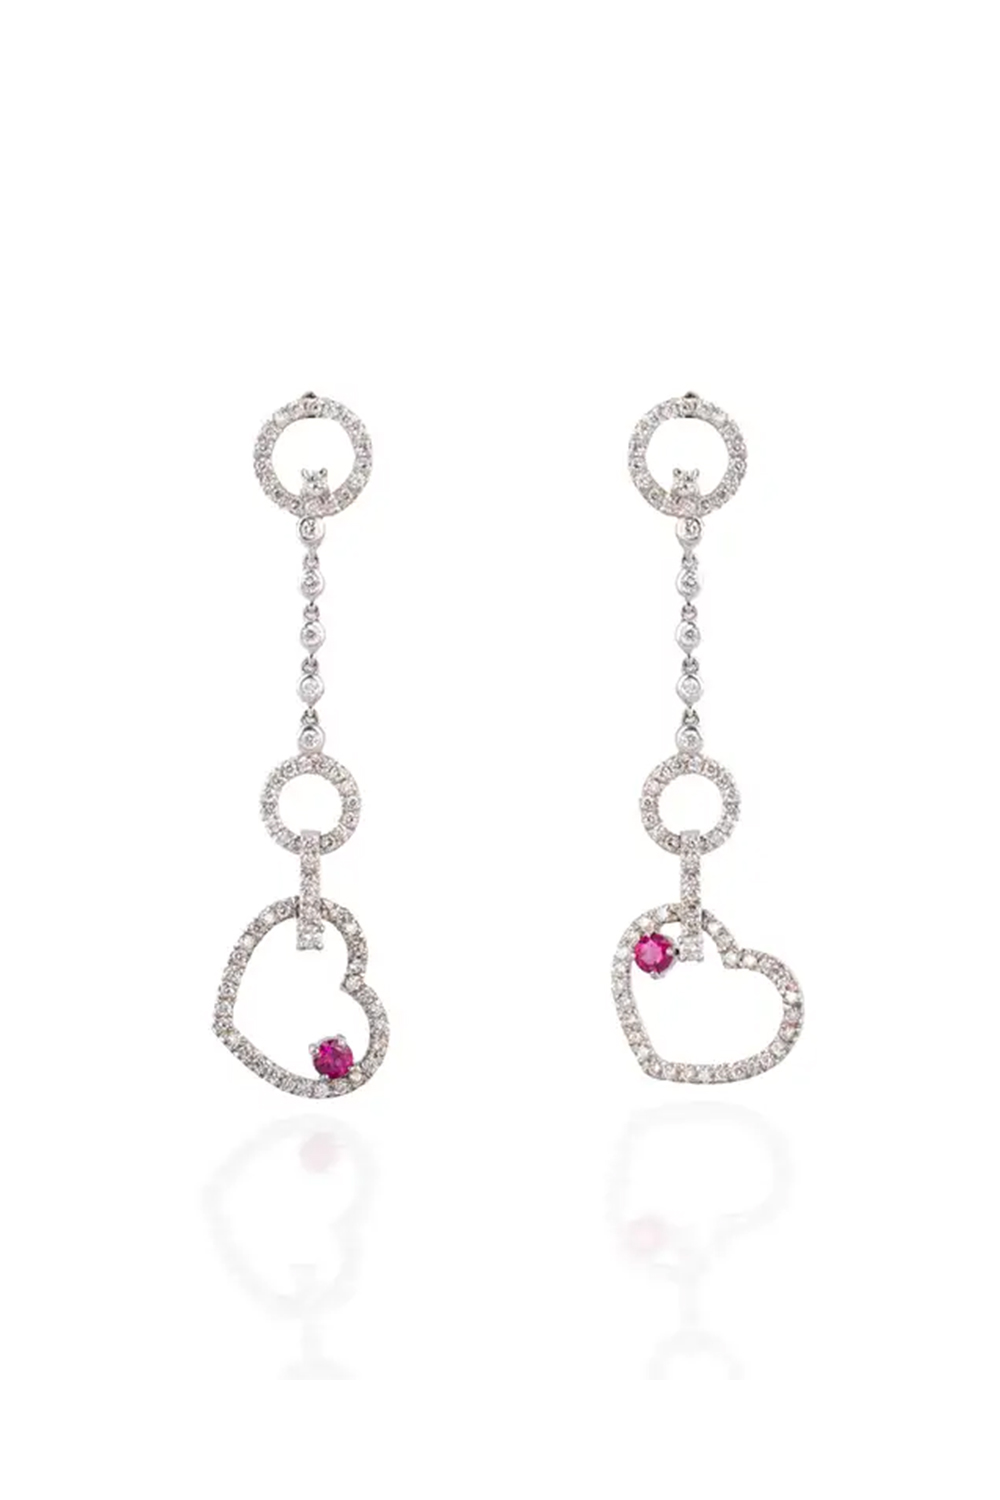 18k gold 1.52cts Diamond and 0.38cts Ruby Earring